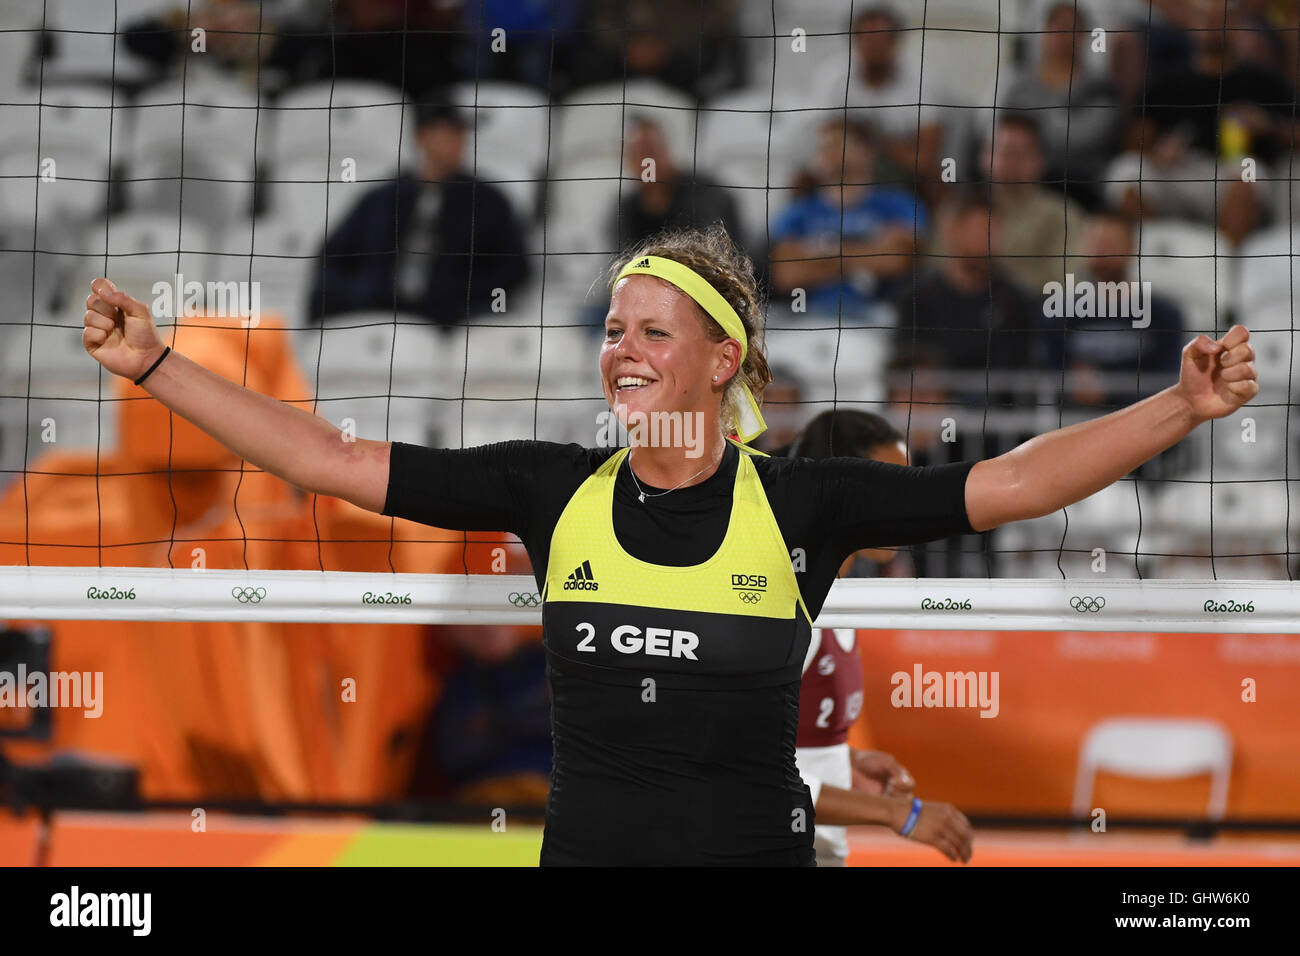 Rio de Janeiro, Brazil. 11th Aug, 2016. Britta Buethe of Germany reacts during the Women's Lucky Loser match Pazo/Agudo of Venezuela against Borger/Buethe of Germany at the Beach Volleyball events during the Rio 2016 Olympic Games at the Beach Volleyball Arena Copacabana in Rio de Janeiro, Brazil, 11 August 2016. Photo: Sebastian Kahnert/dpa/Alamy Live News Stock Photo